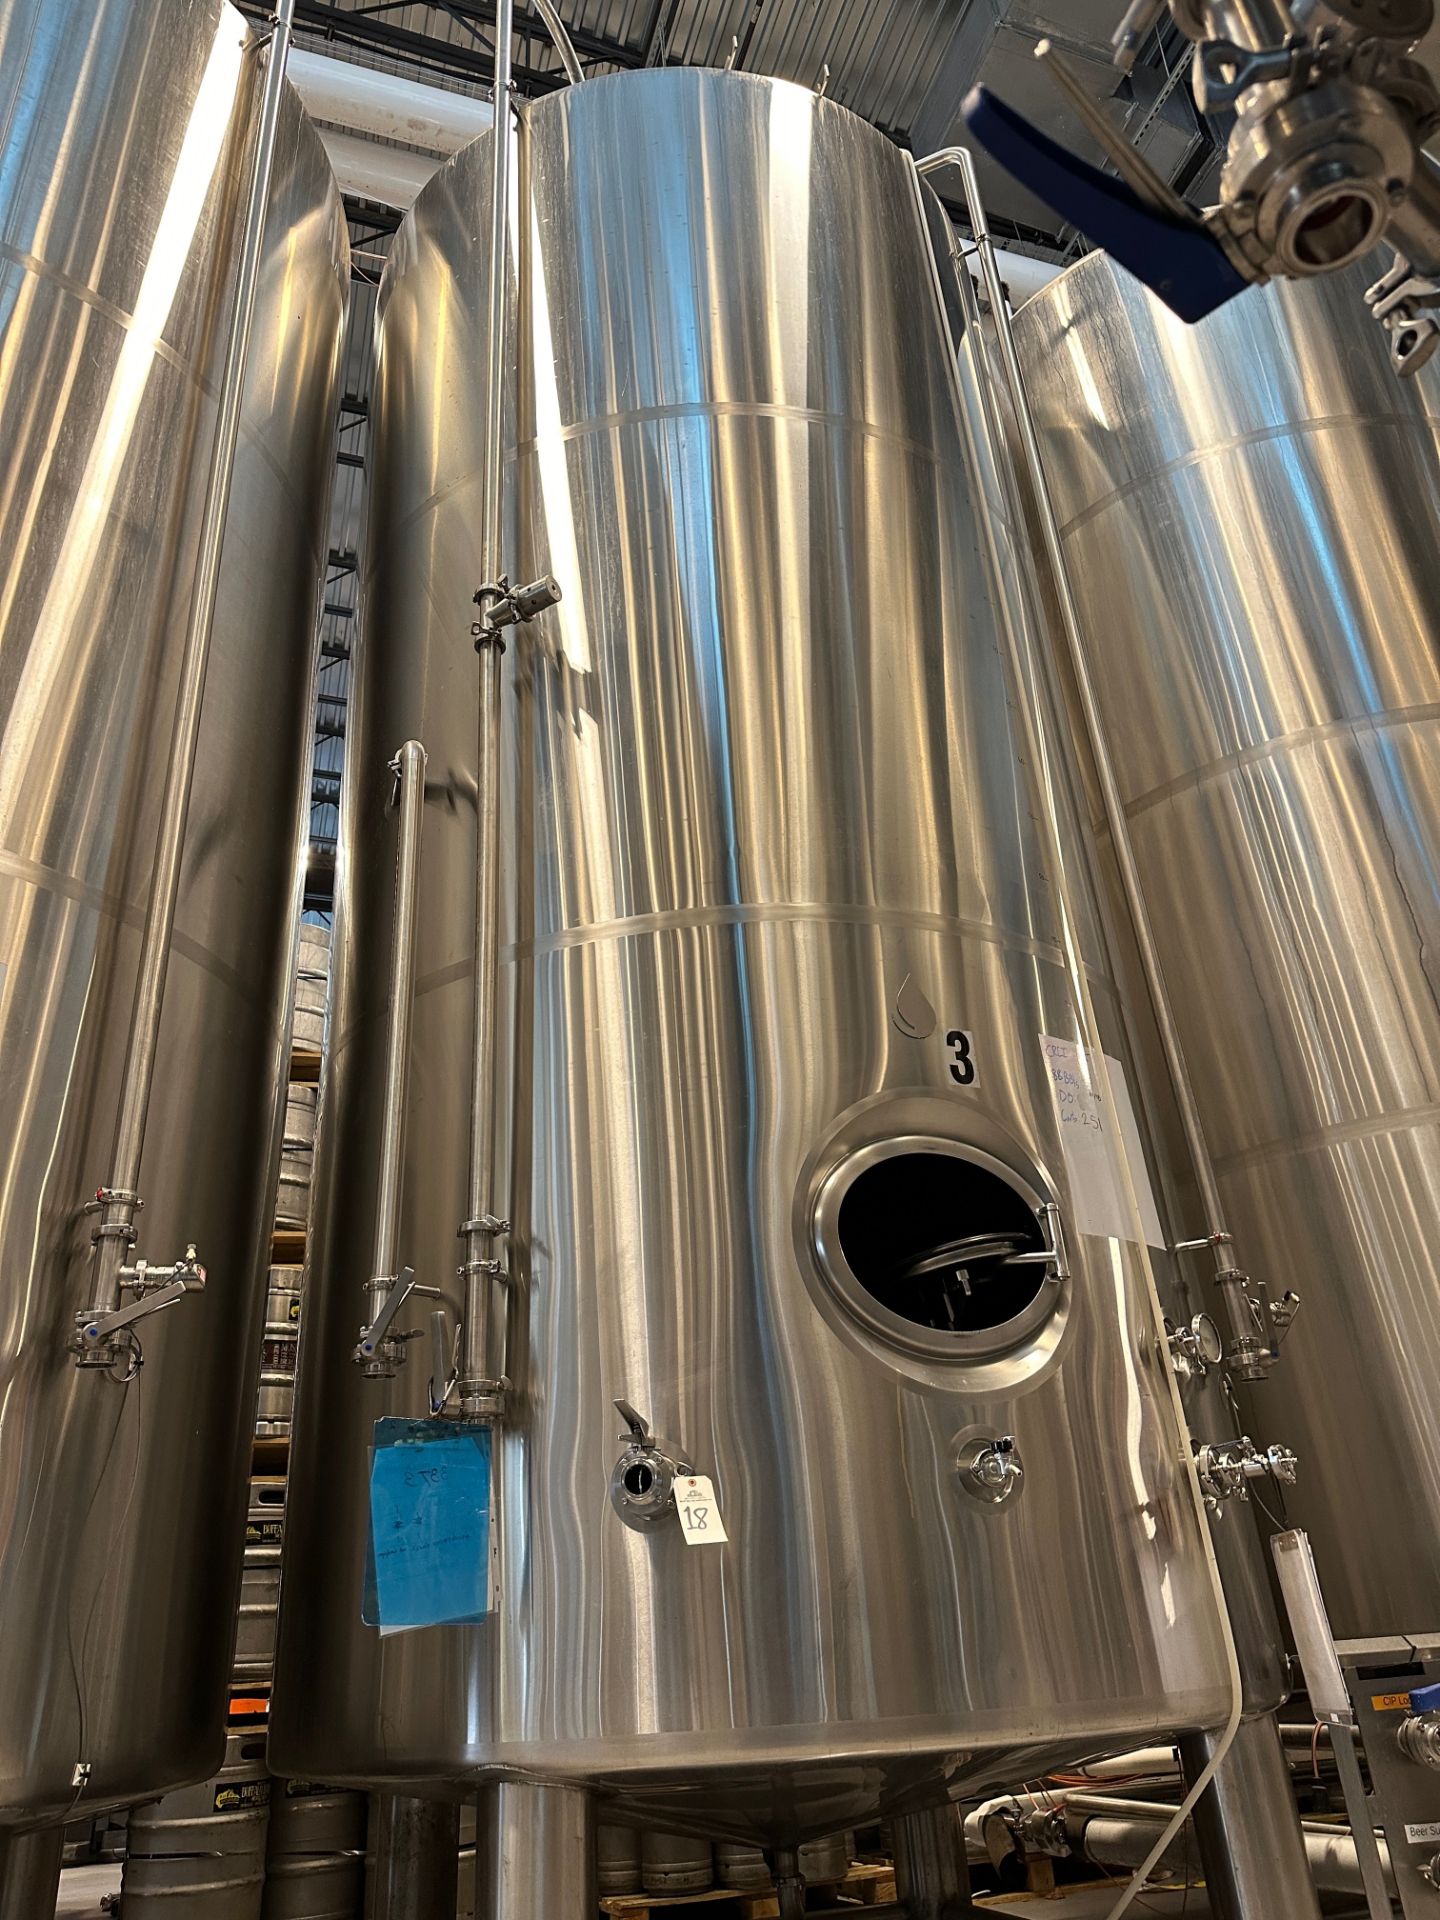 Complete 40 BBL Microbrewery - 40 BBL Deutsche 4-Vessel Brewhouse, Tanks, Can Line - See Description - Image 42 of 335